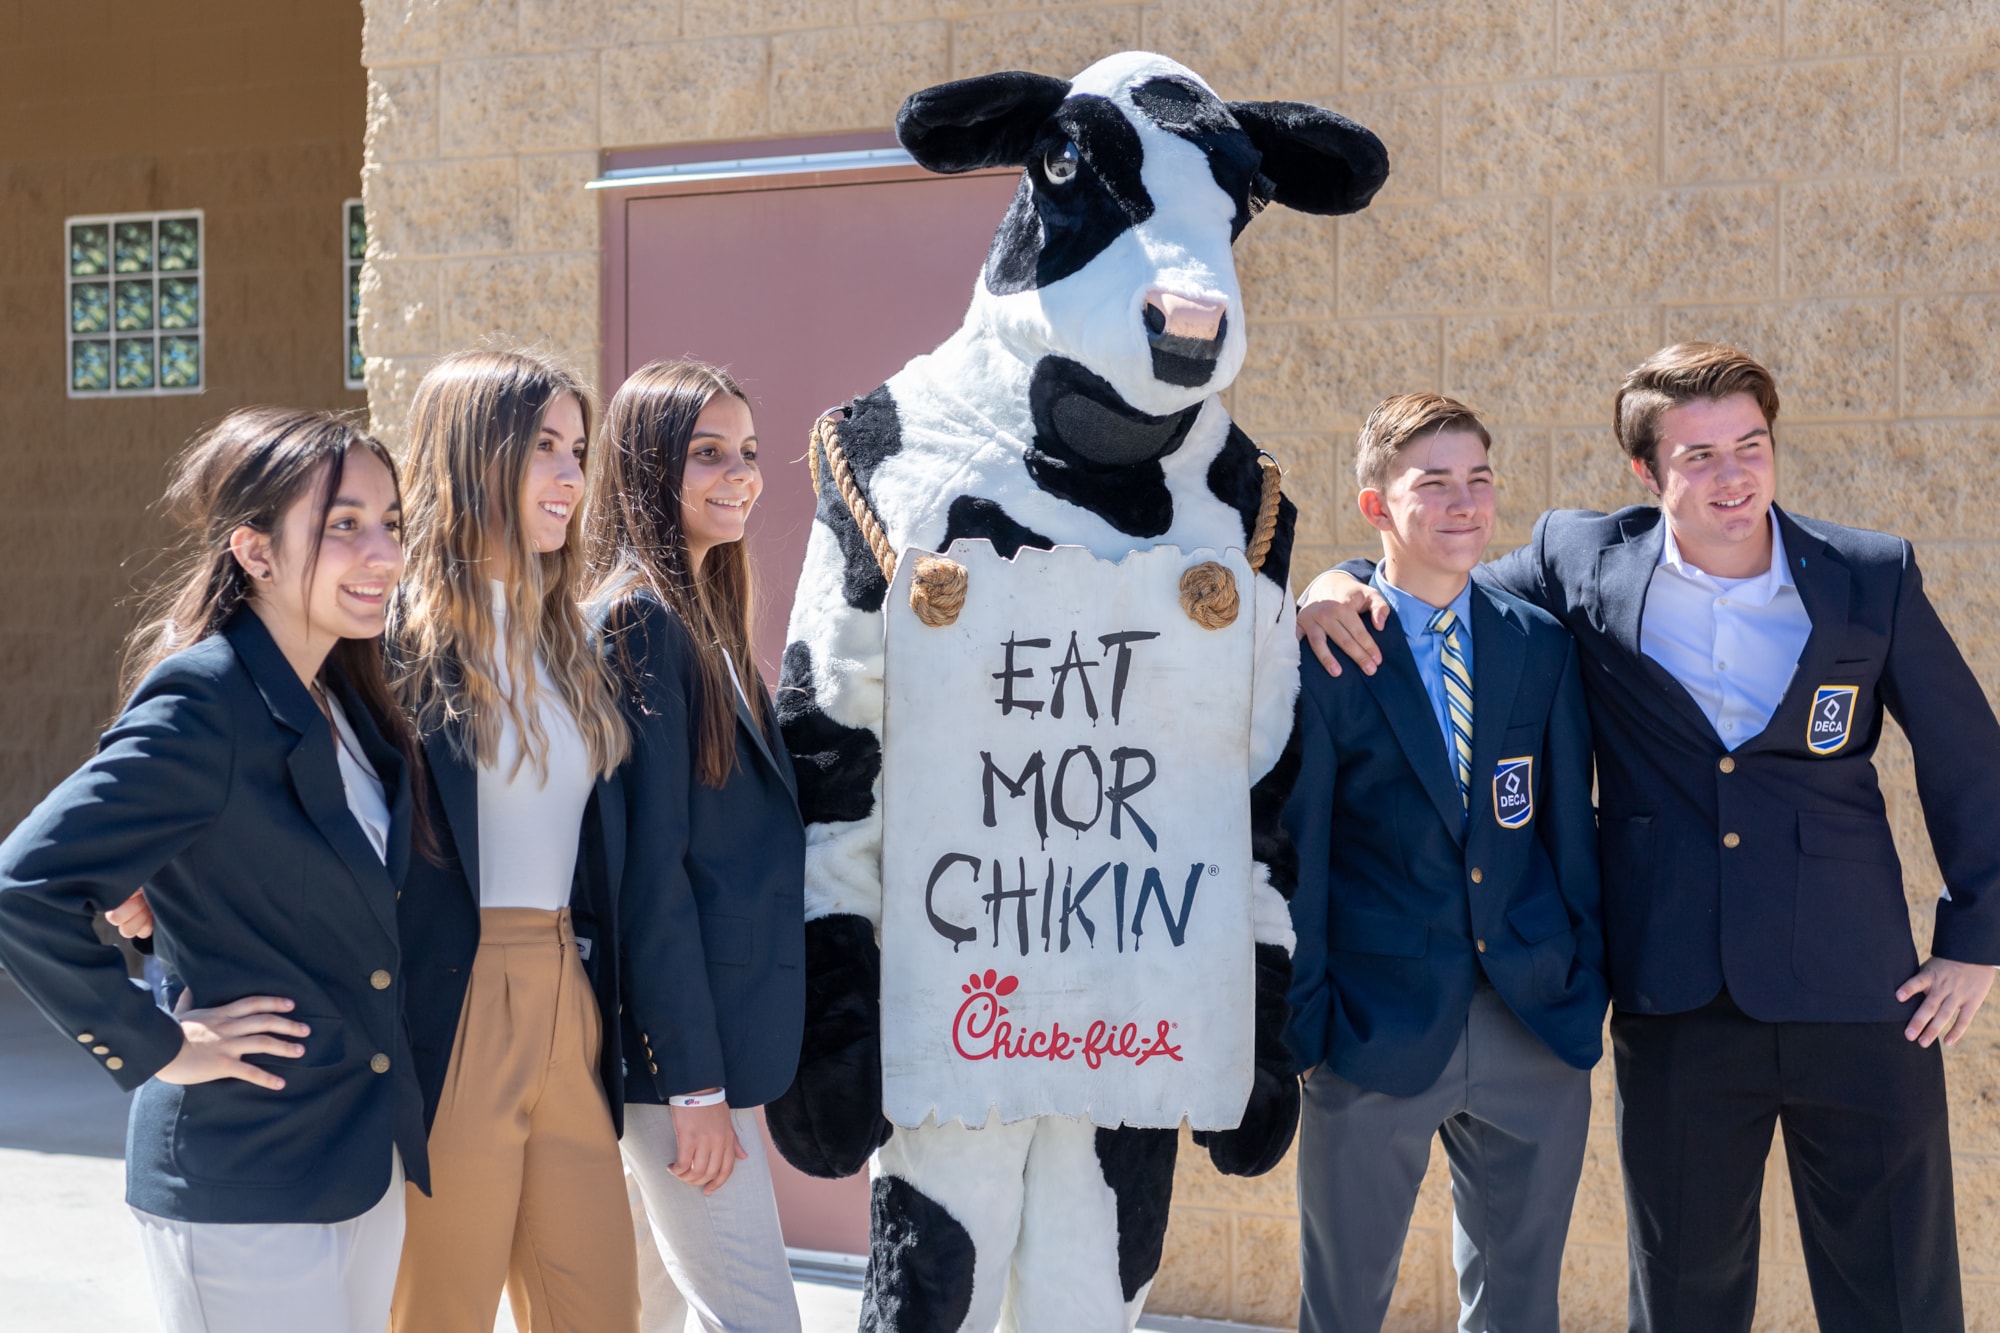 Marketing students wearing DECA coats posing with a cow mascot